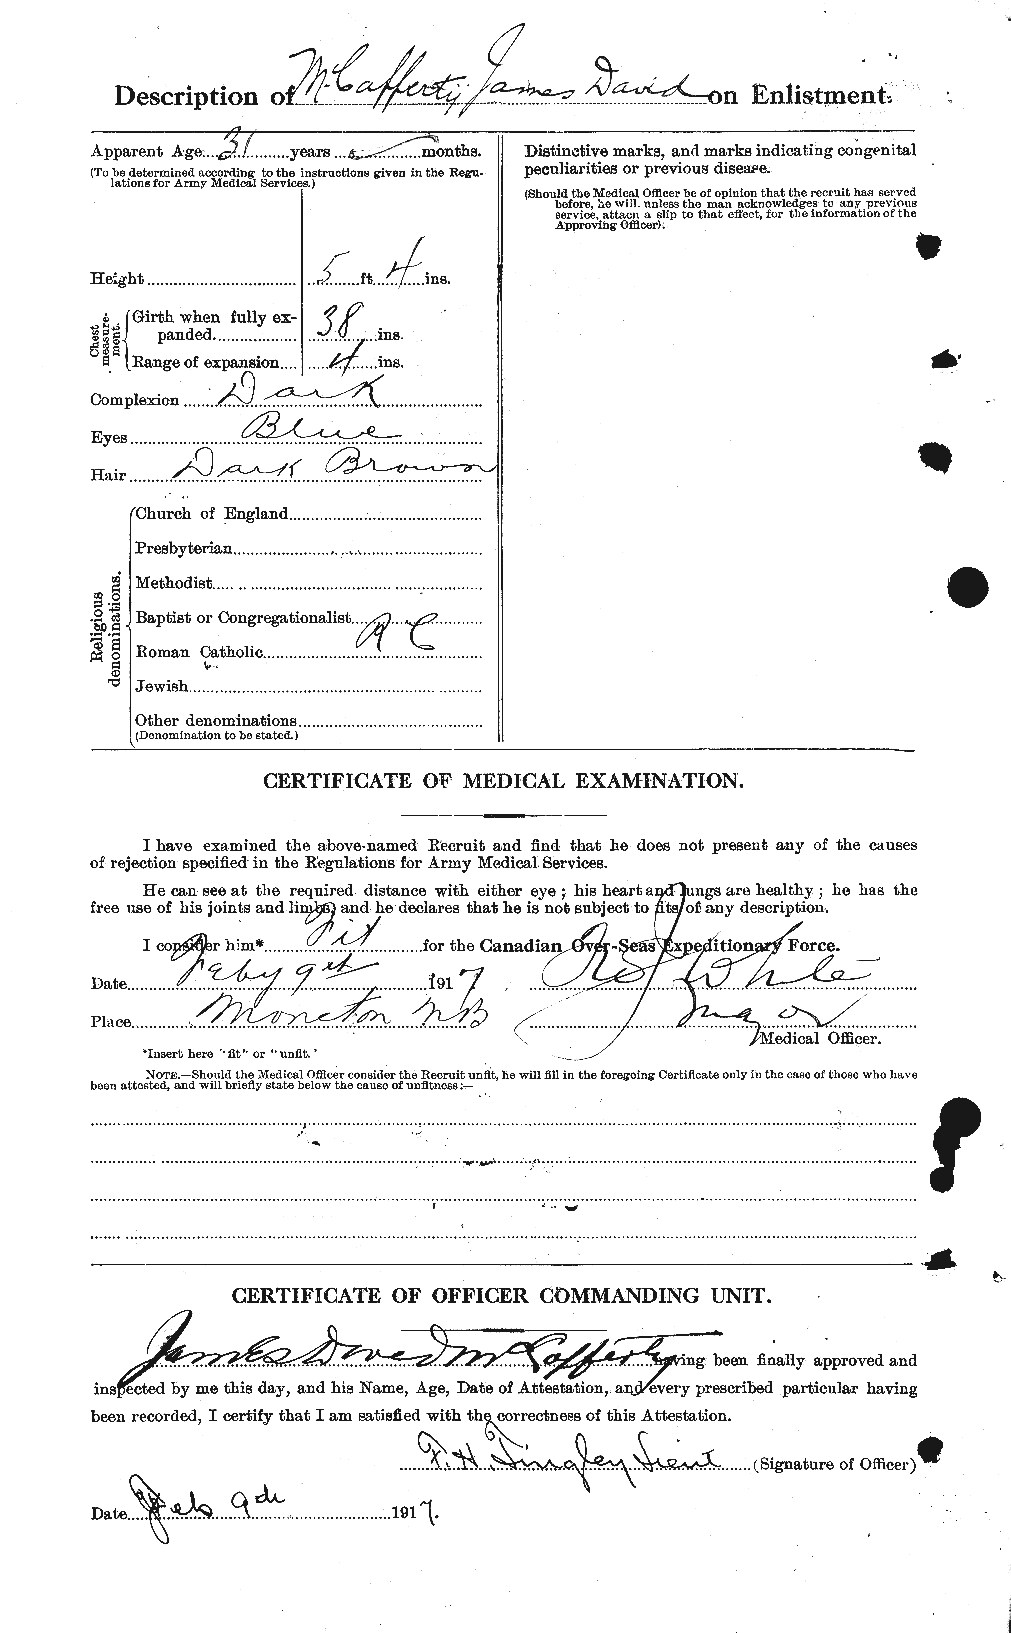 Personnel Records of the First World War - CEF 130959b